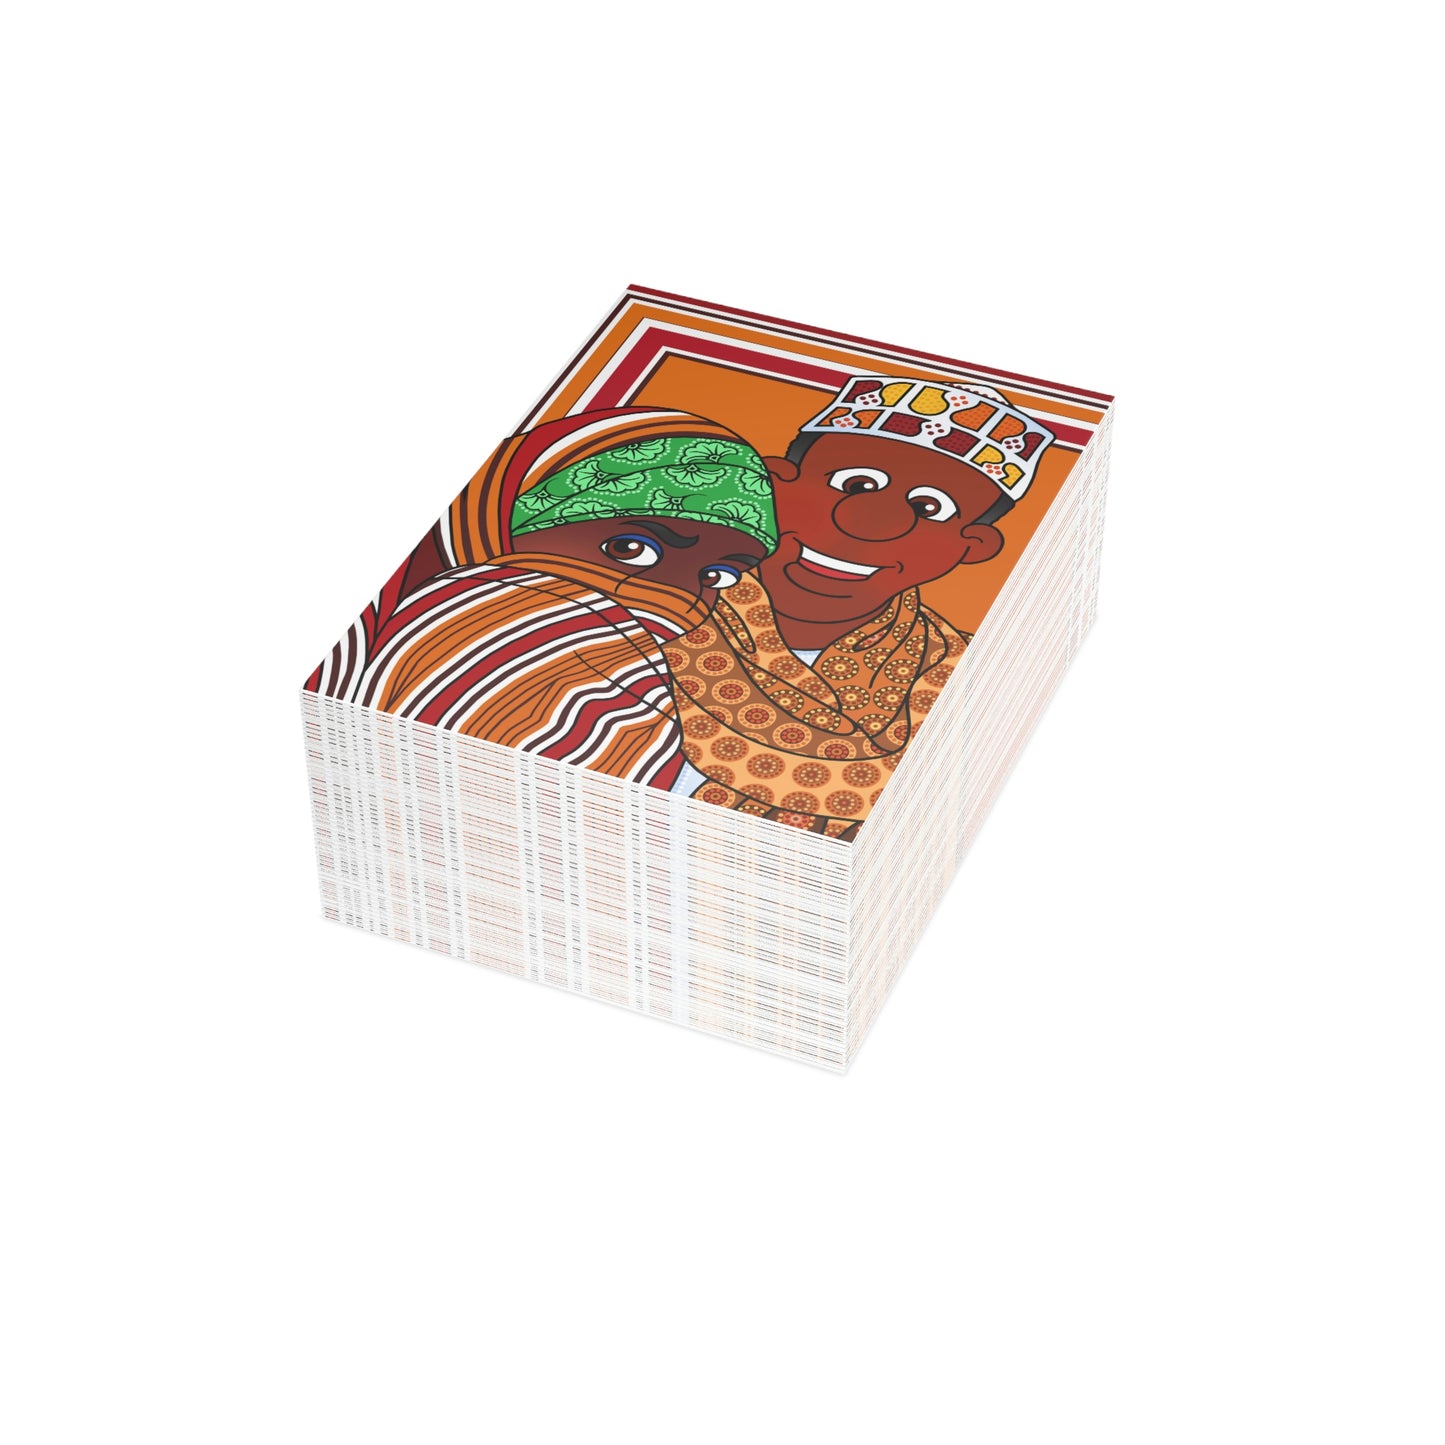 The Kitty Cat Cried! Greeting Cards (1, 10, 30, and 50pcs)